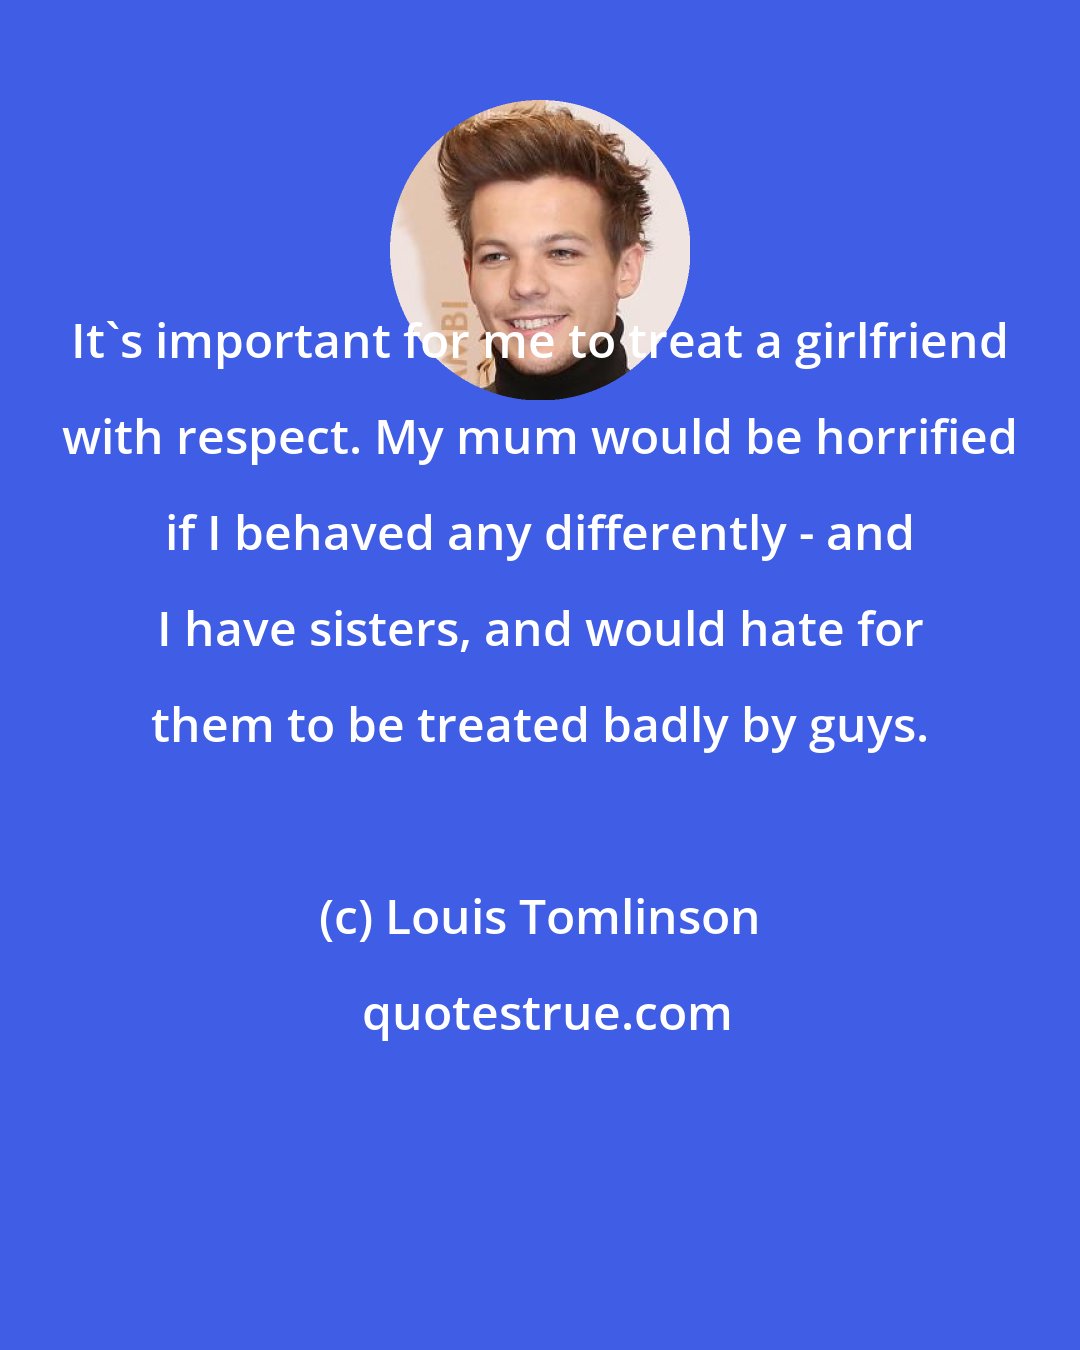 Louis Tomlinson: It's important for me to treat a girlfriend with respect. My mum would be horrified if I behaved any differently - and I have sisters, and would hate for them to be treated badly by guys.